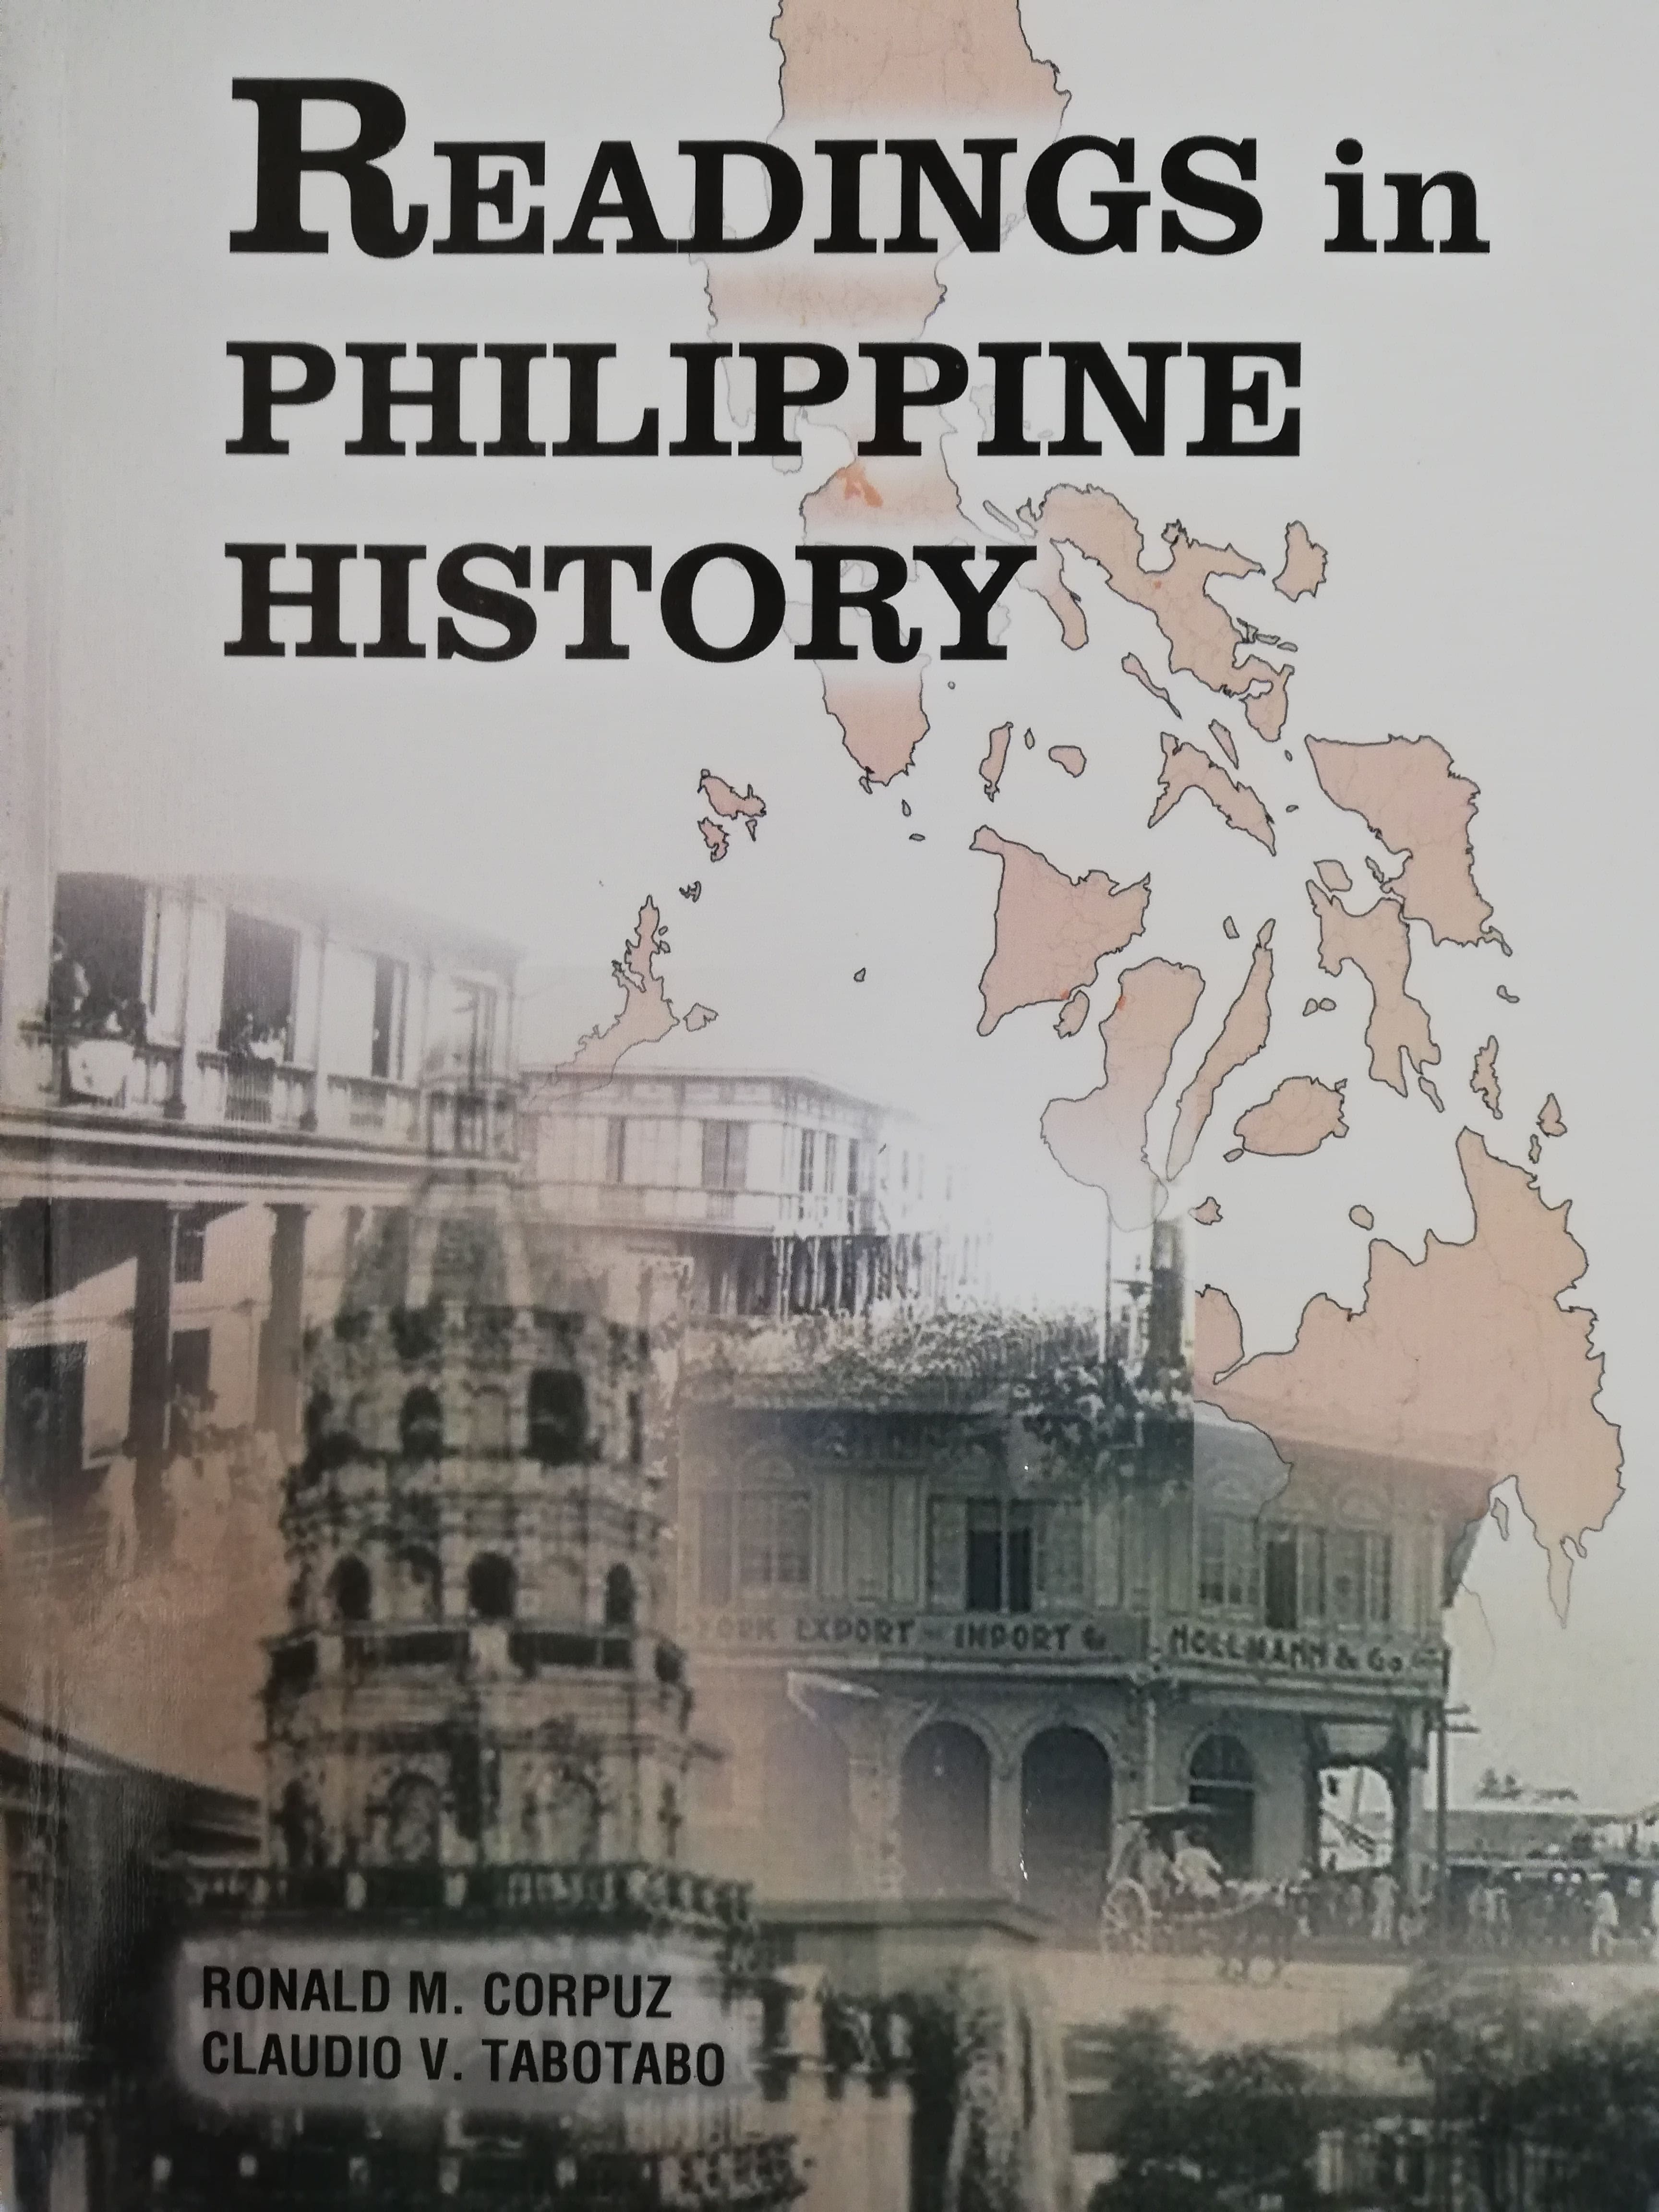 historical research topic in the philippines